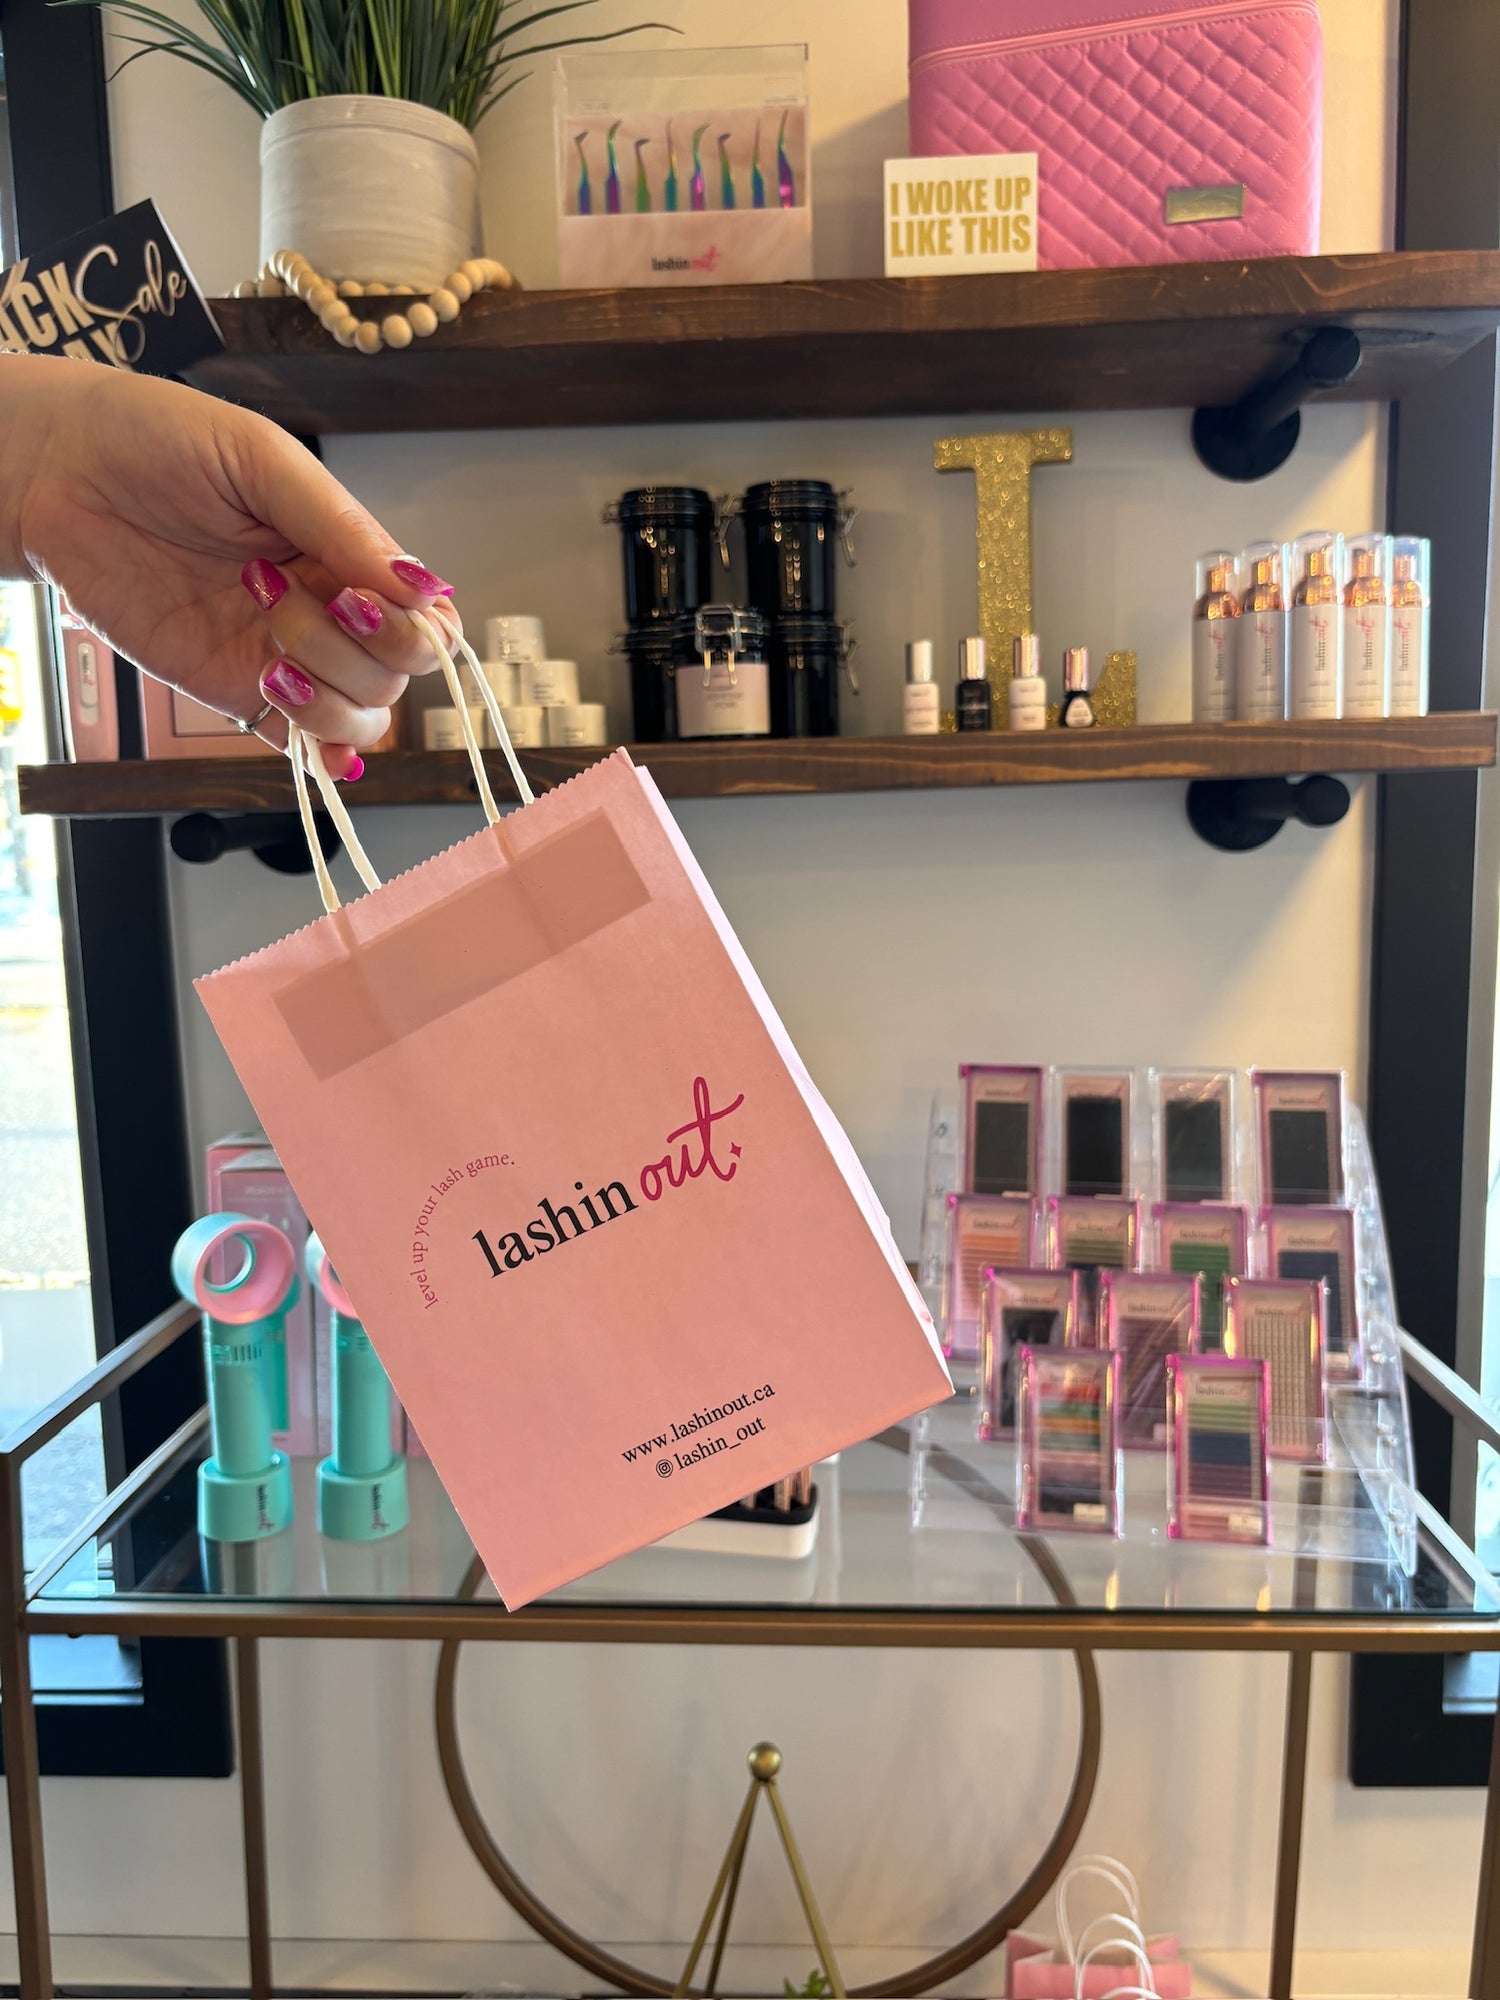 A women is holding a pink paper bag with a white handle. The bag says "lashin out". Behind the bag is a shelf with Lashin Out lashing products. There is Lash Suds lash cleanser, eyelash extension glues, and different trays of eyelash extensions. 